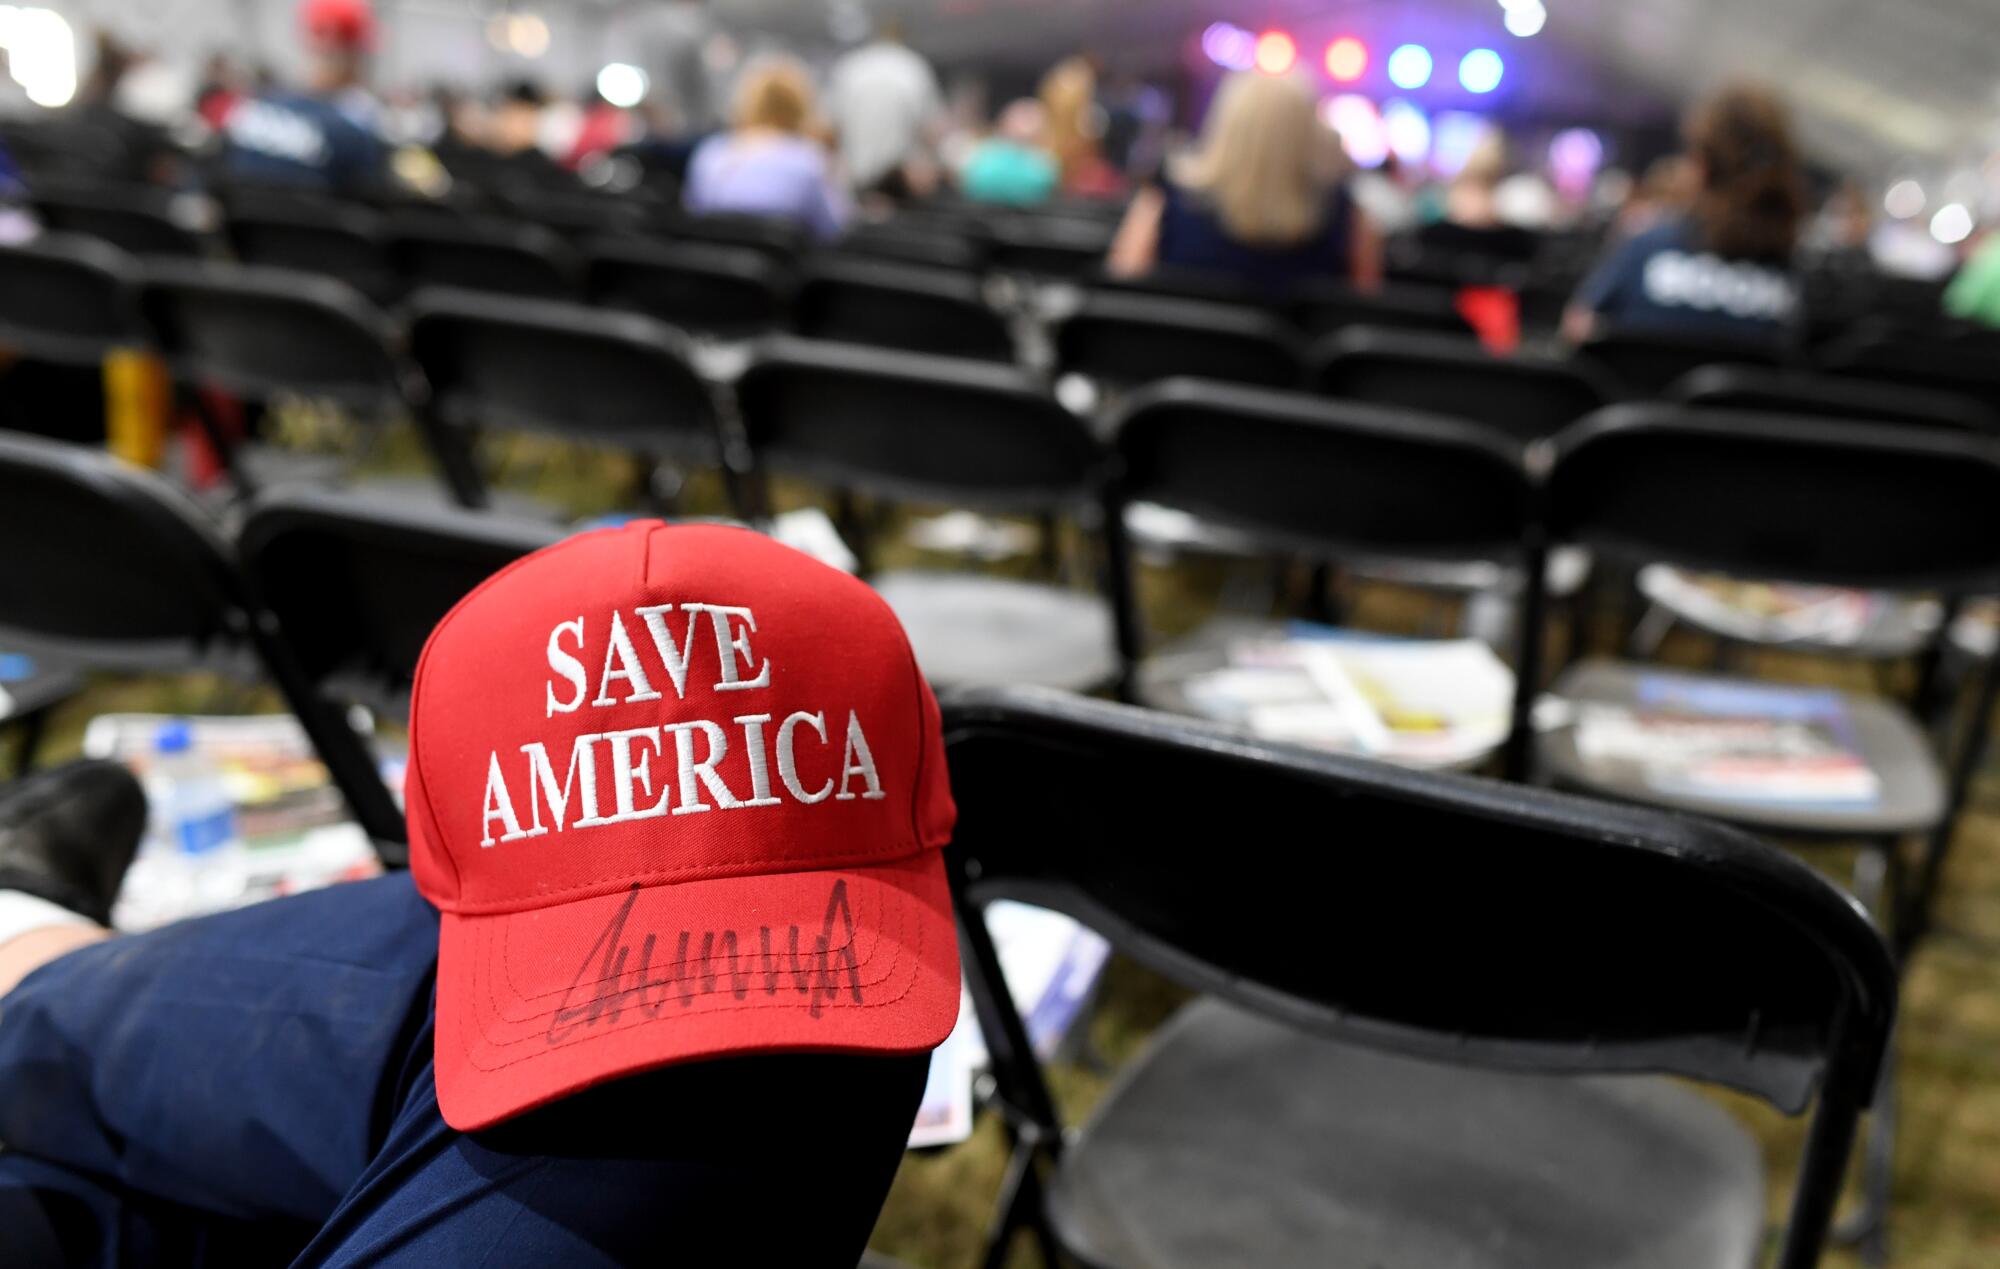 A person with a red cap that says "Save America" and an autograph on its bill 